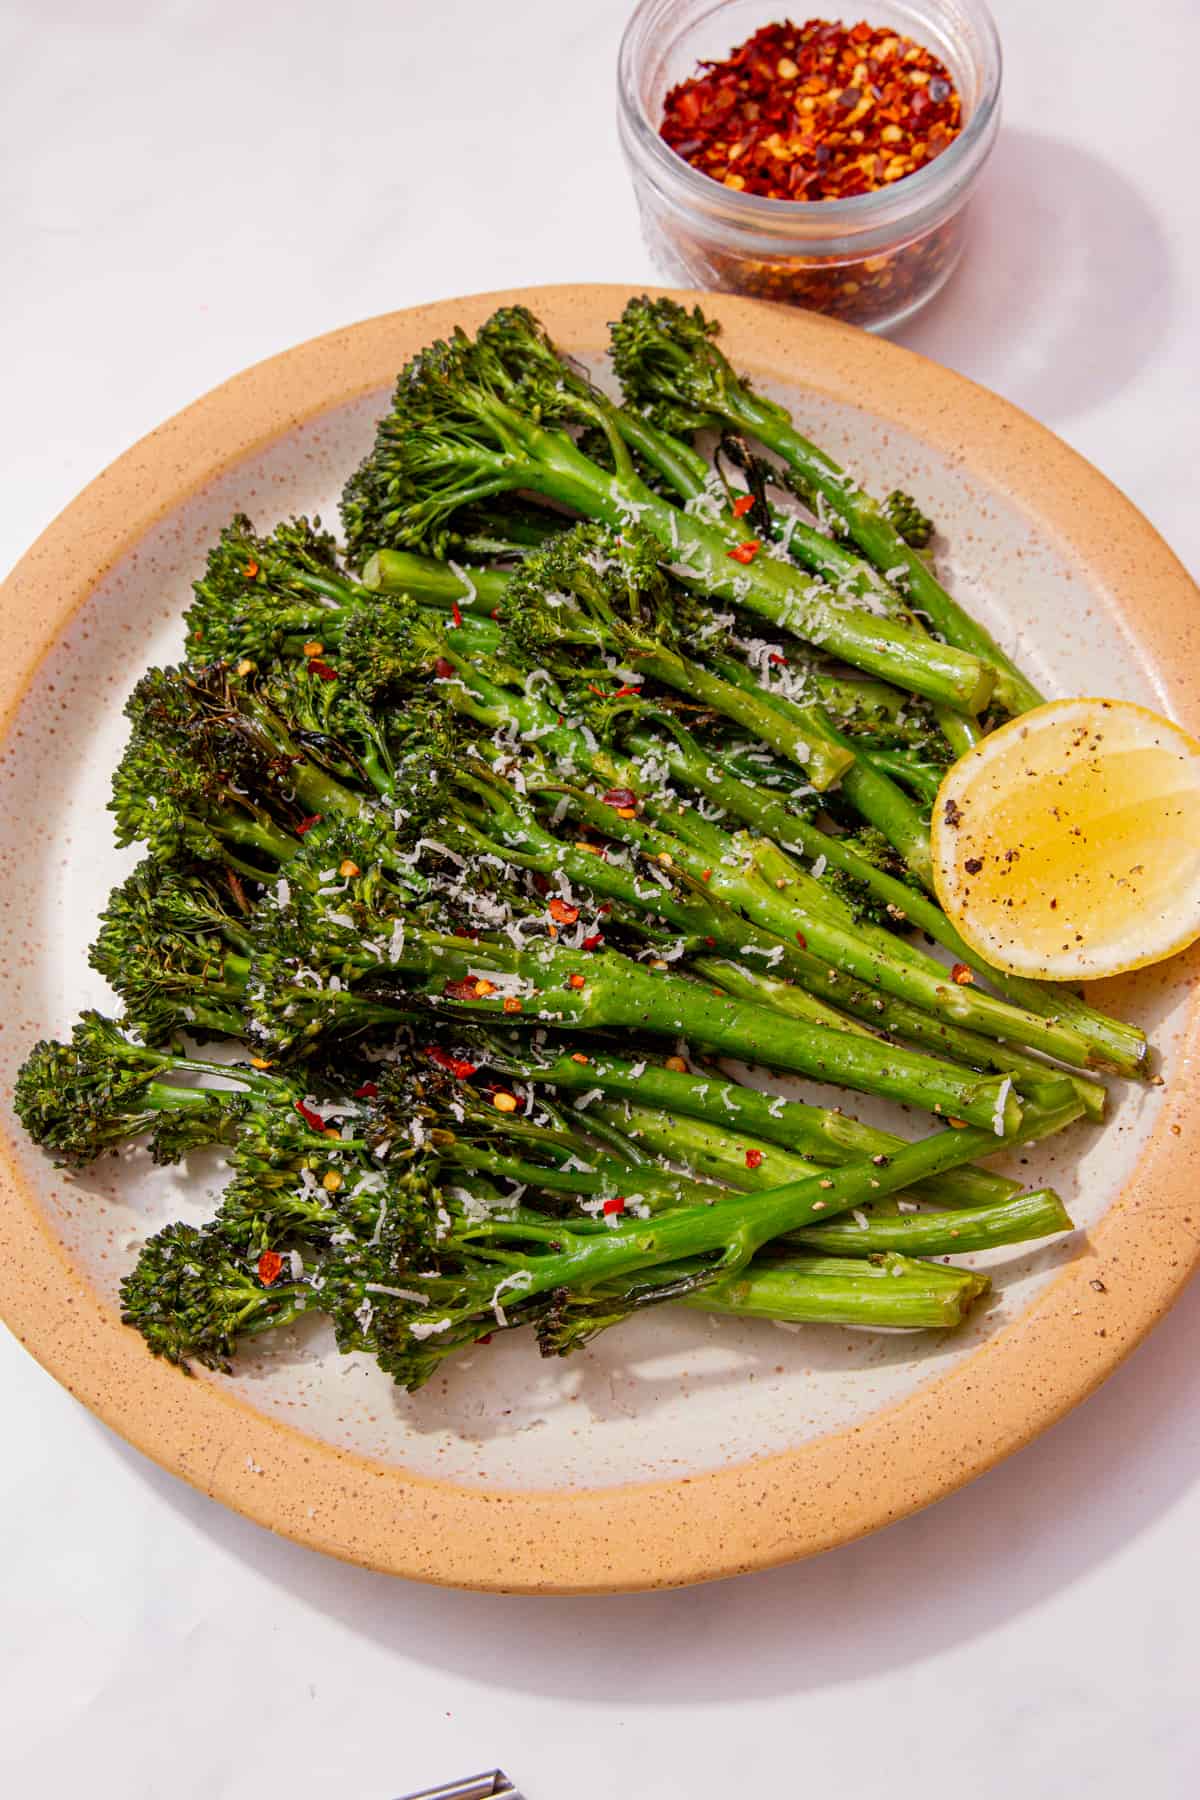 Tenderstem broccoli displayed on a plate with a wedge of lemon and a small bowl of chilli flakes behind the plate.